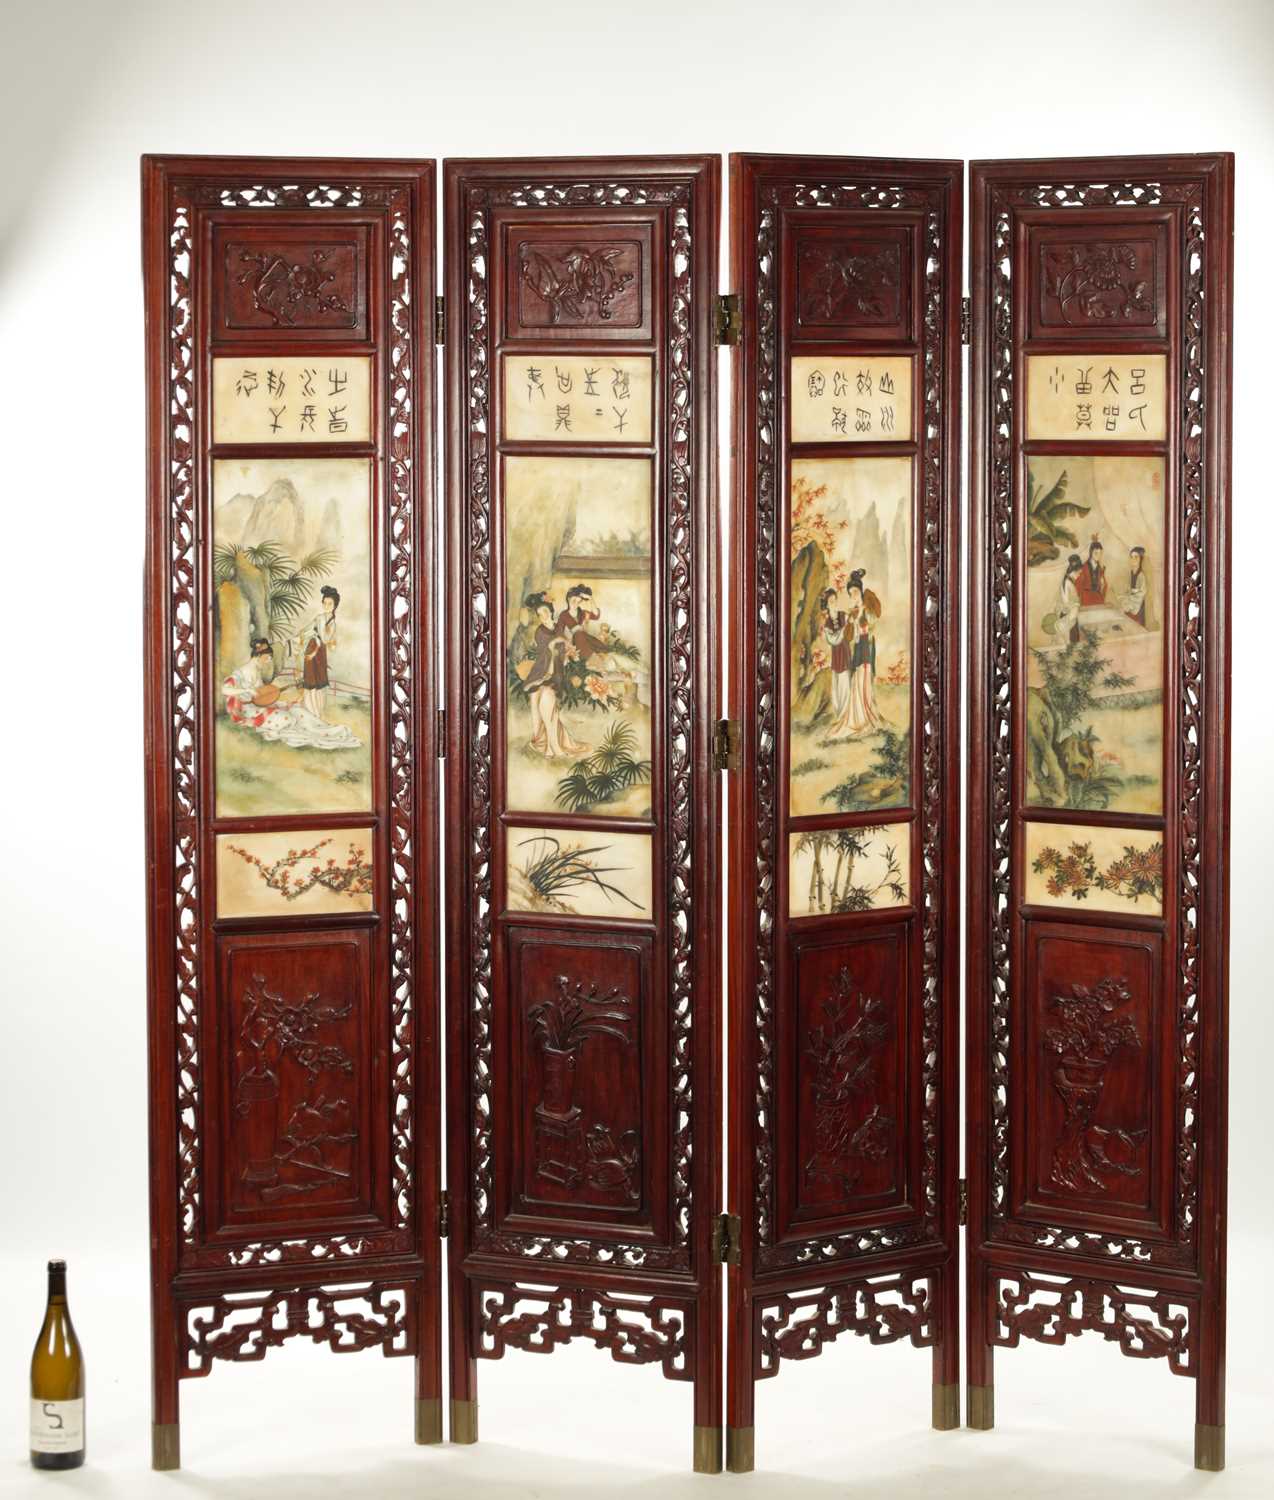 AN EARLY 20TH CENTURY CHINESE FOUR-SECTION FOLDING SCREEN - Image 2 of 10